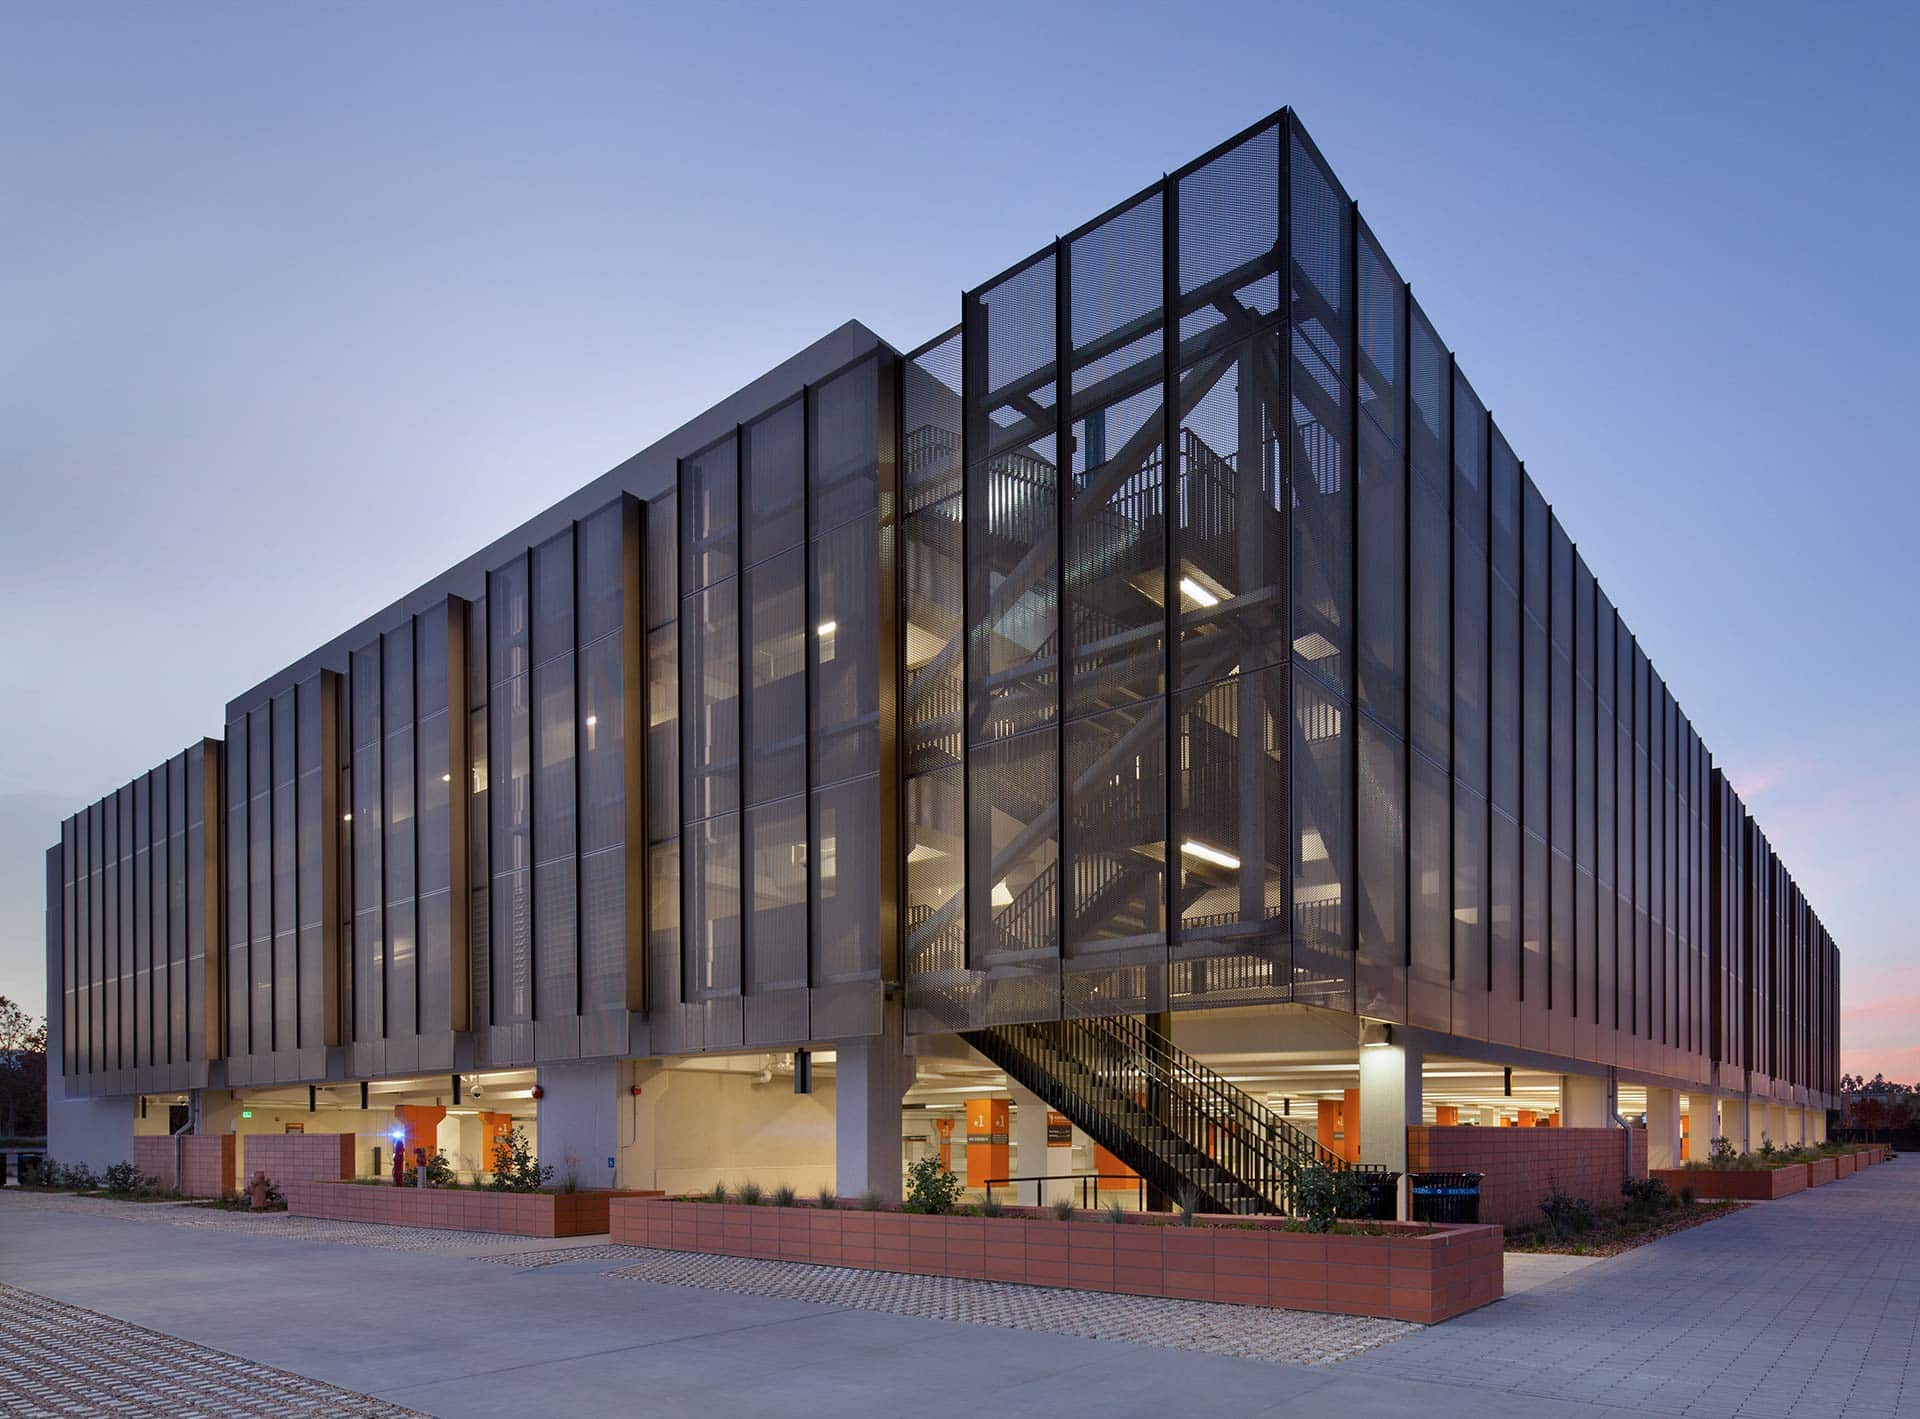 Photograph of the perforated metal panel screen system at Stanford University Parking Garage